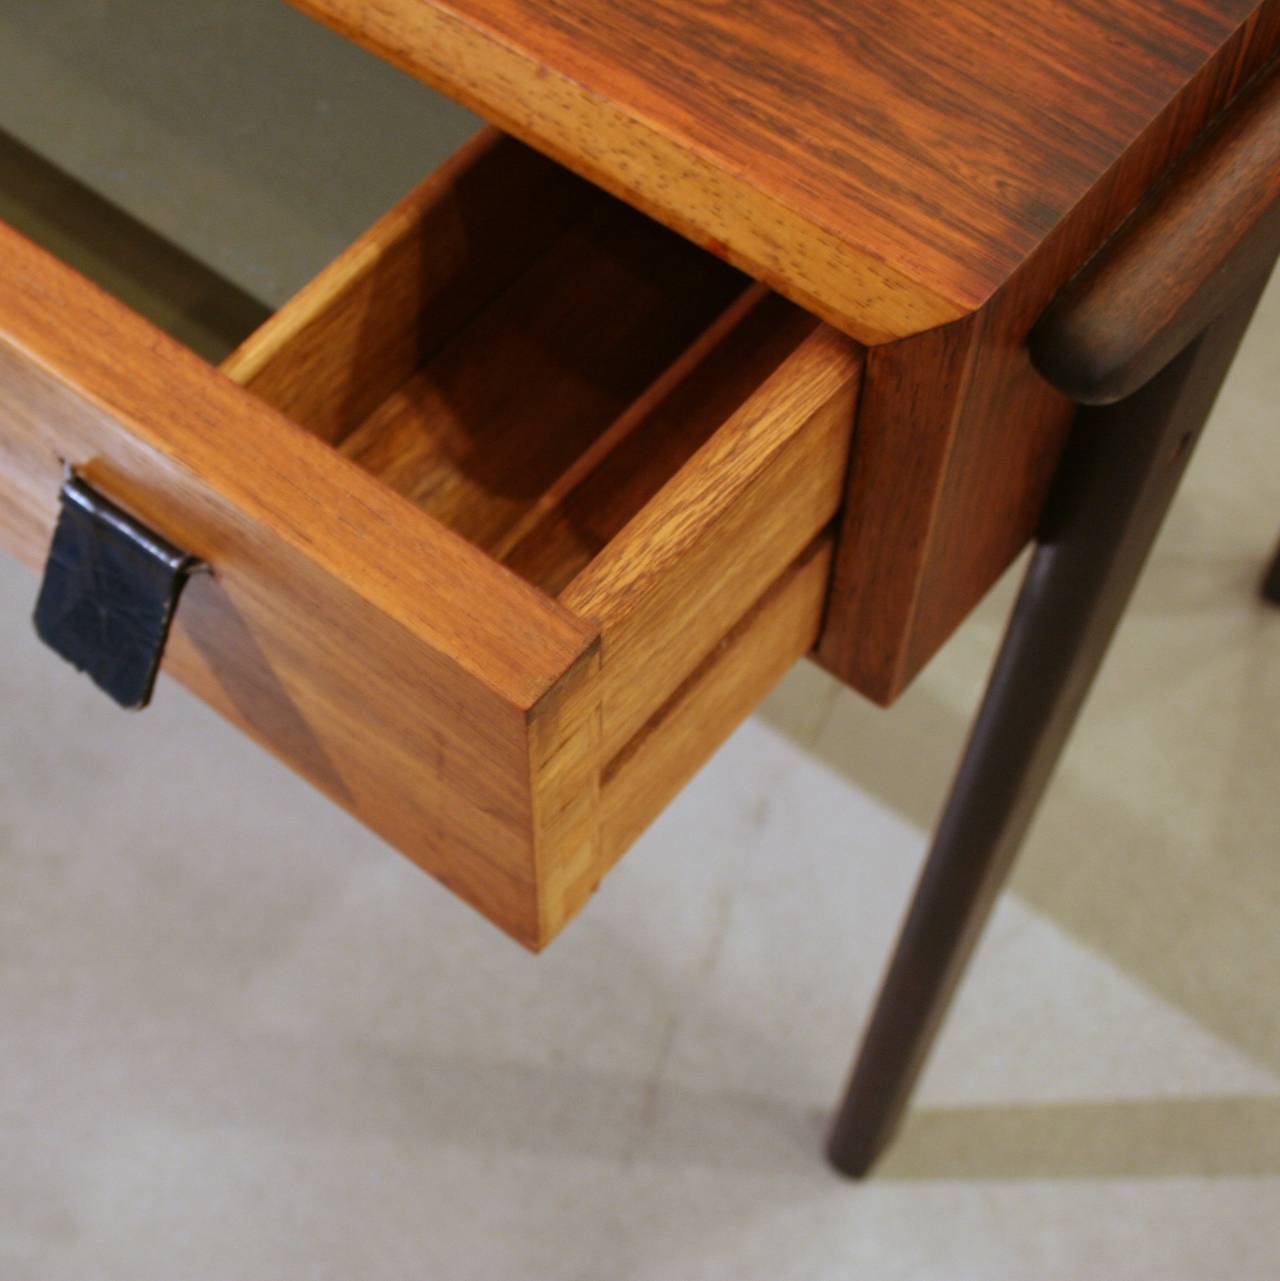 A unique solution for a side table with storage, this piece was originally designed as a sewing table. Featuring a stunning rosewood grain and rich patina, there is also a single drawer with leather tab pulls, and splayed legs which are stained